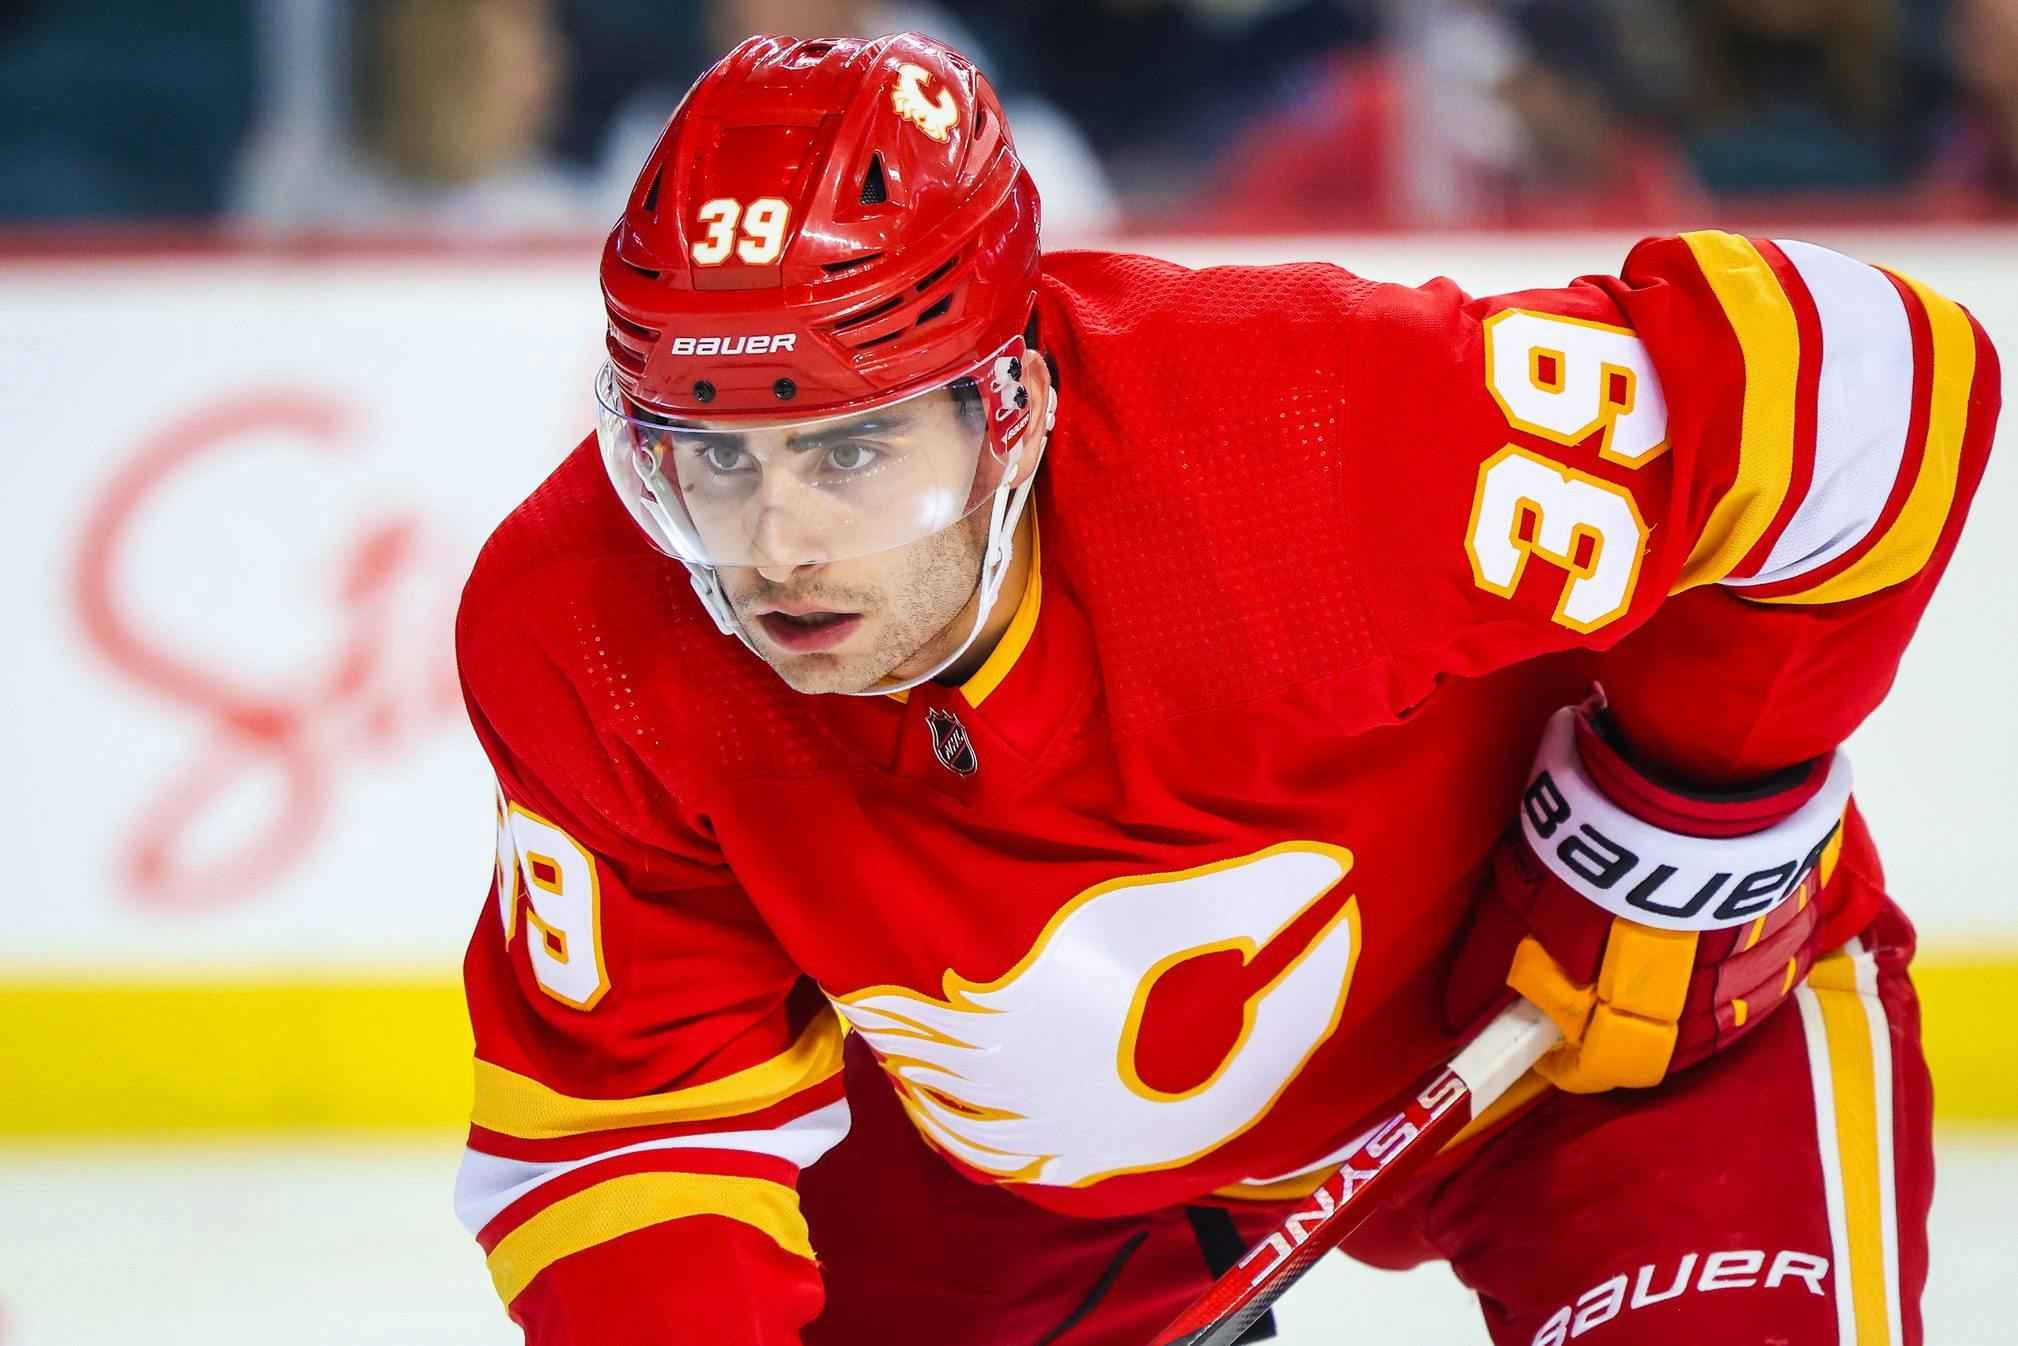 Will Huberdeau and the Flames Re-Ignite the Torch in 2023-24?